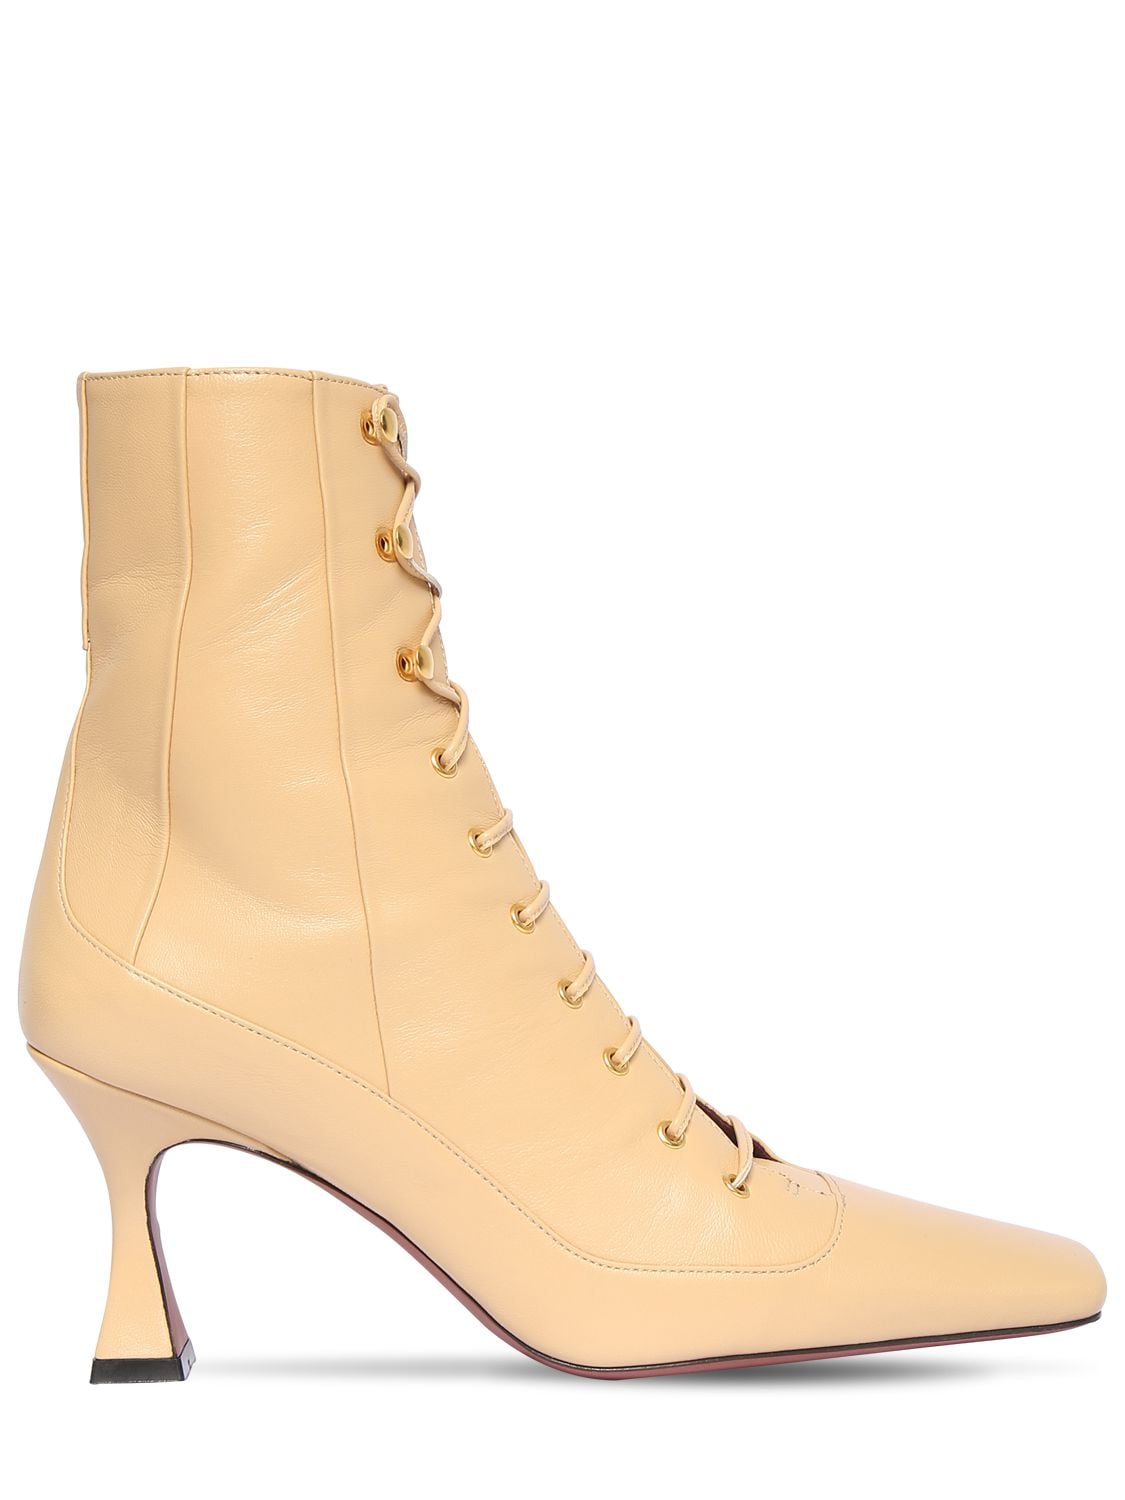 MANU ATELIER 80mm Lace-up Leather Ankle Boots